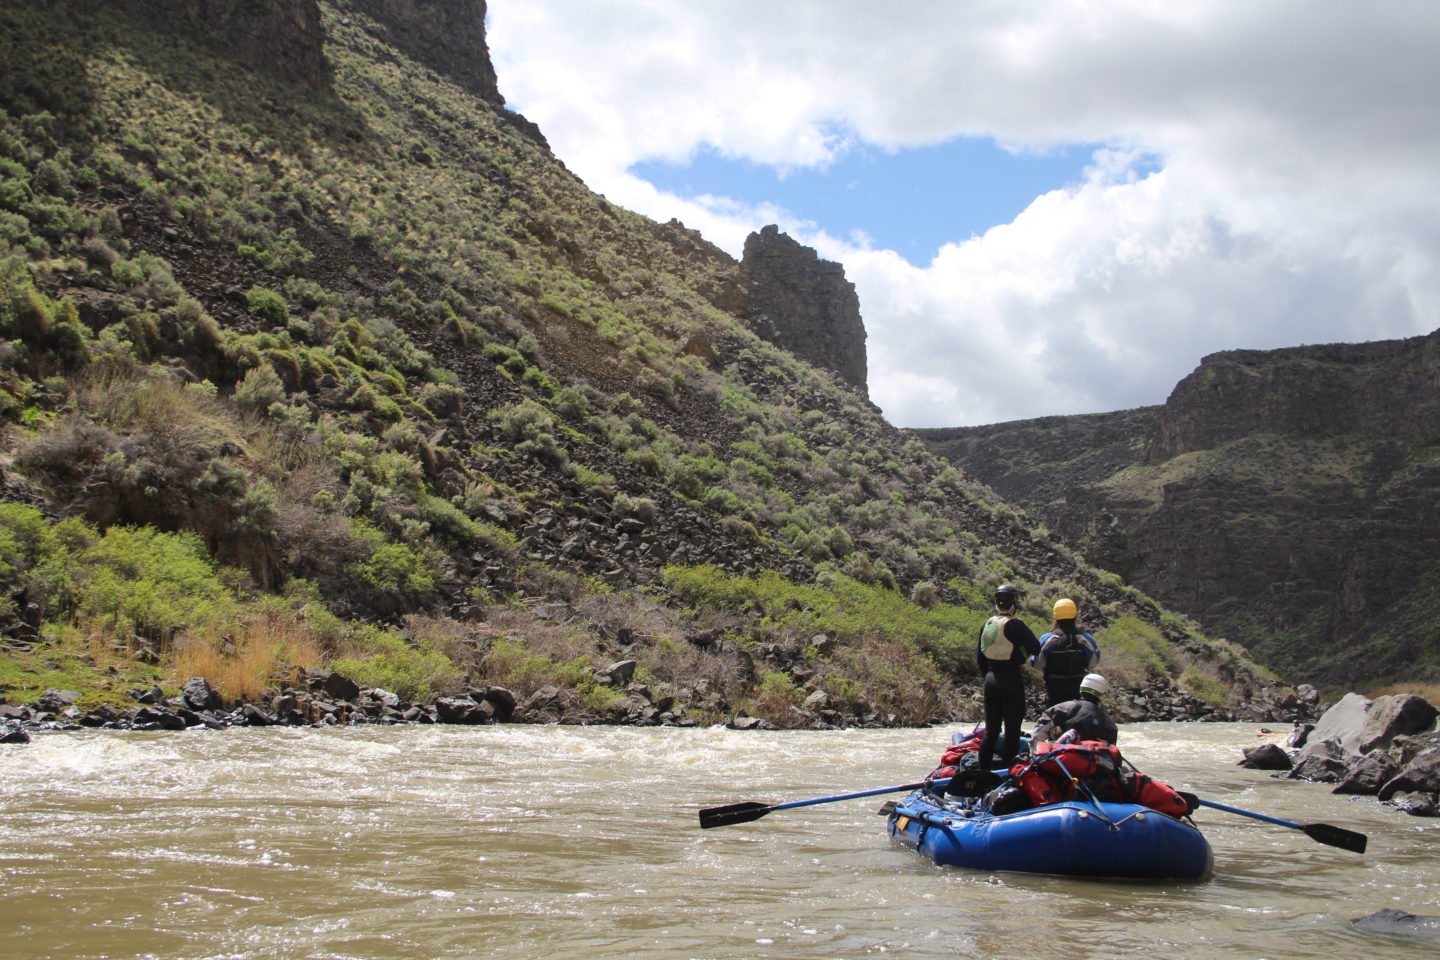 Gearing Up for Idaho Expeditions